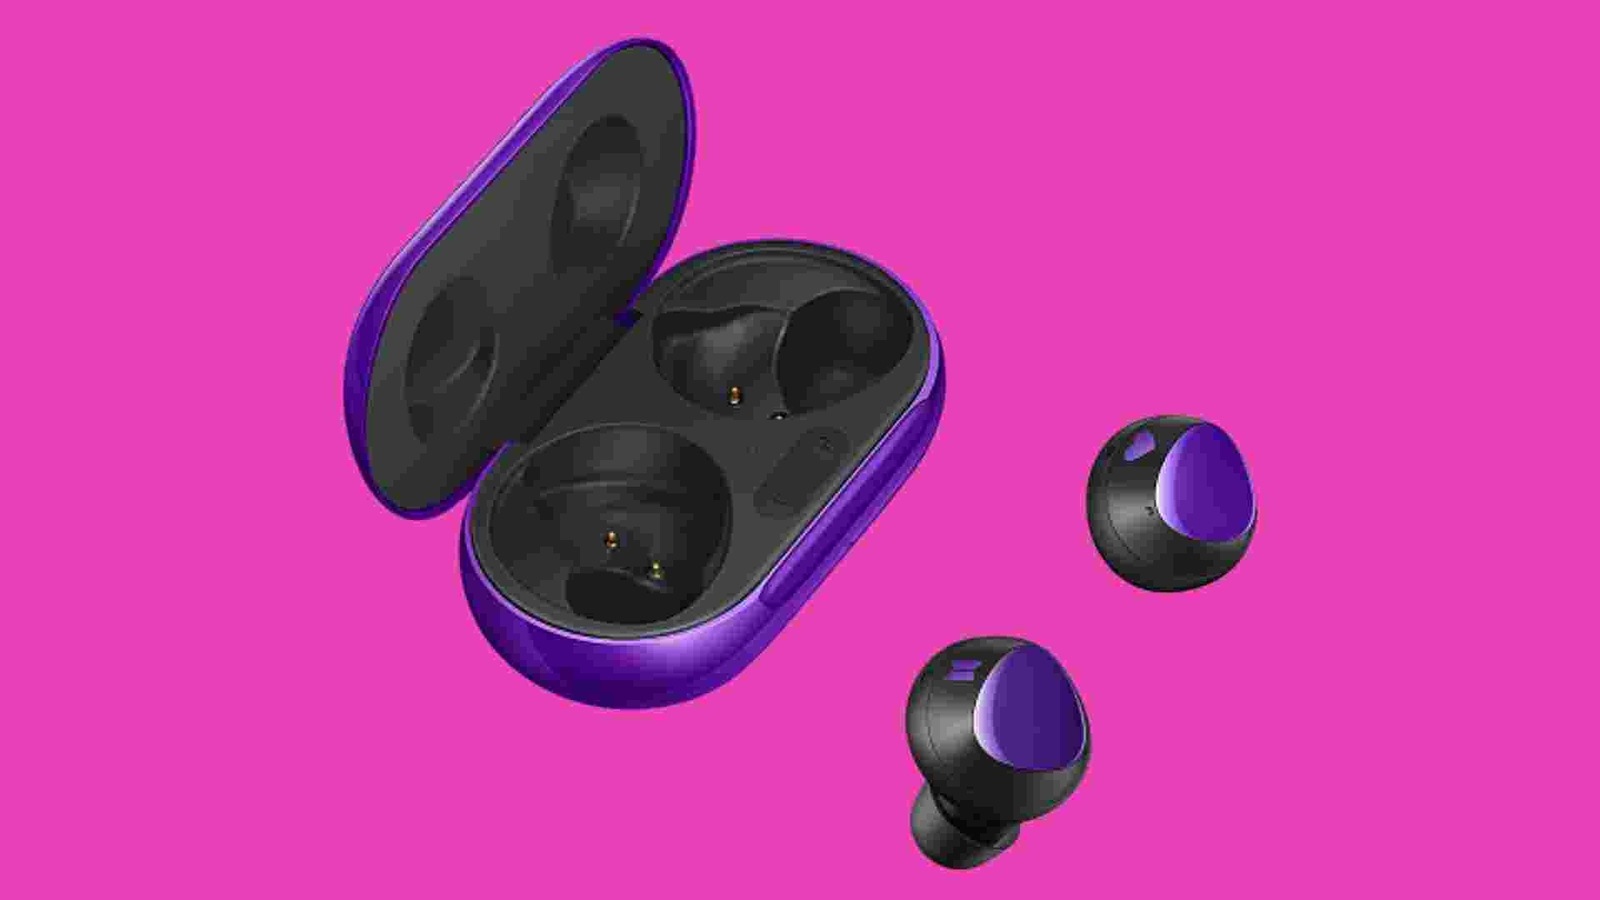 Samsung Galaxy Buds Live to feature active noise